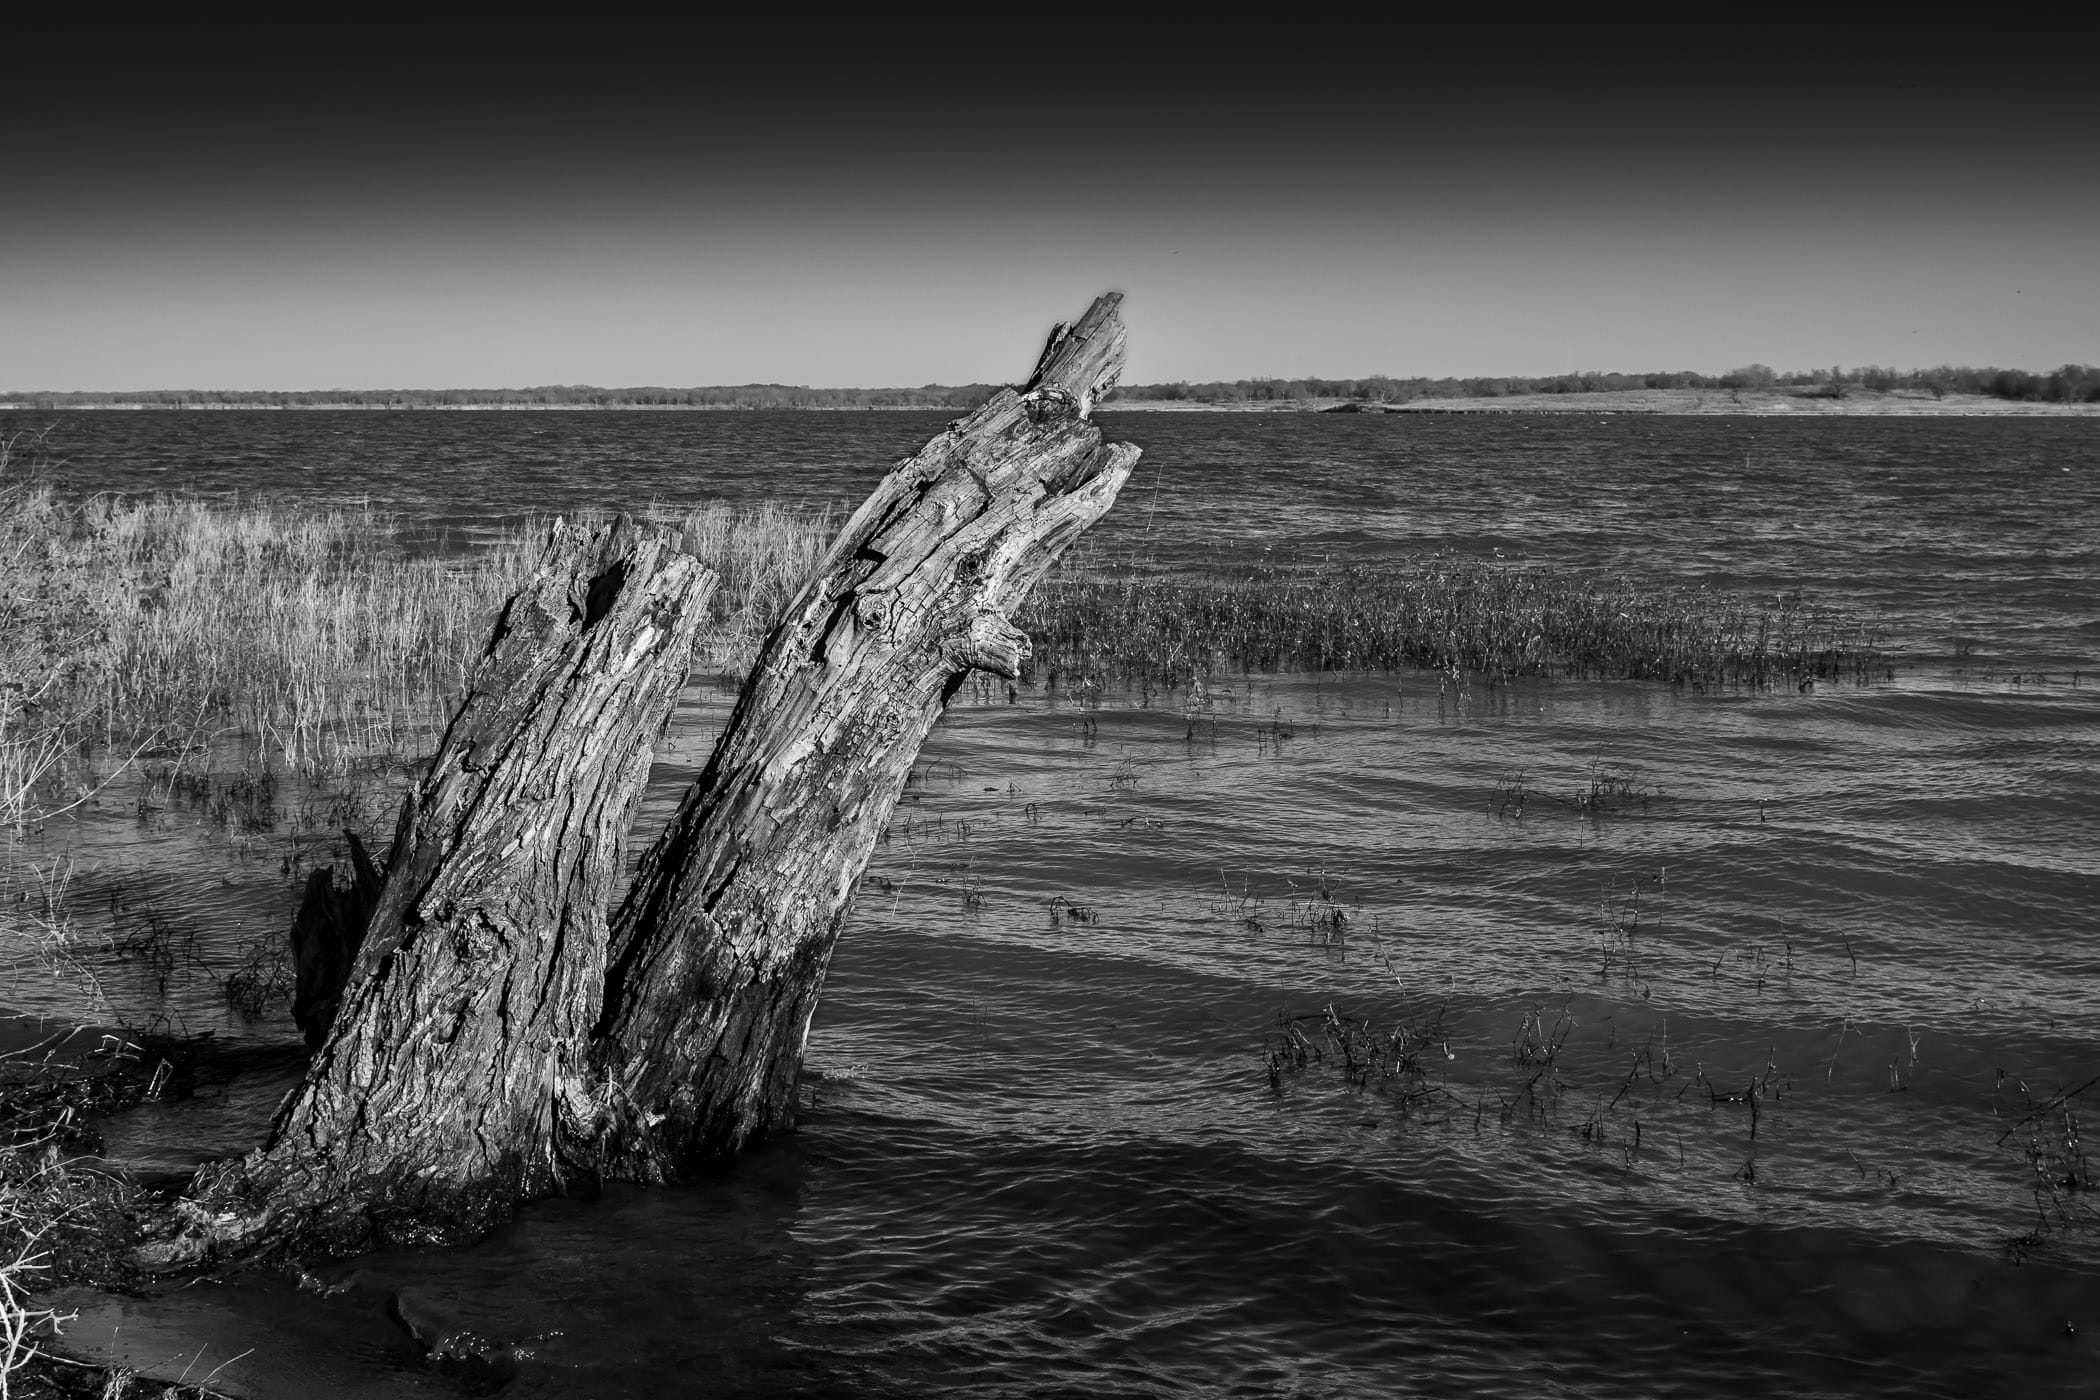 A tree stump emerges from the waters of the Big Mineral Arm of Lake Texoma at the Hagerman National Wildlife Refuge, Texas.